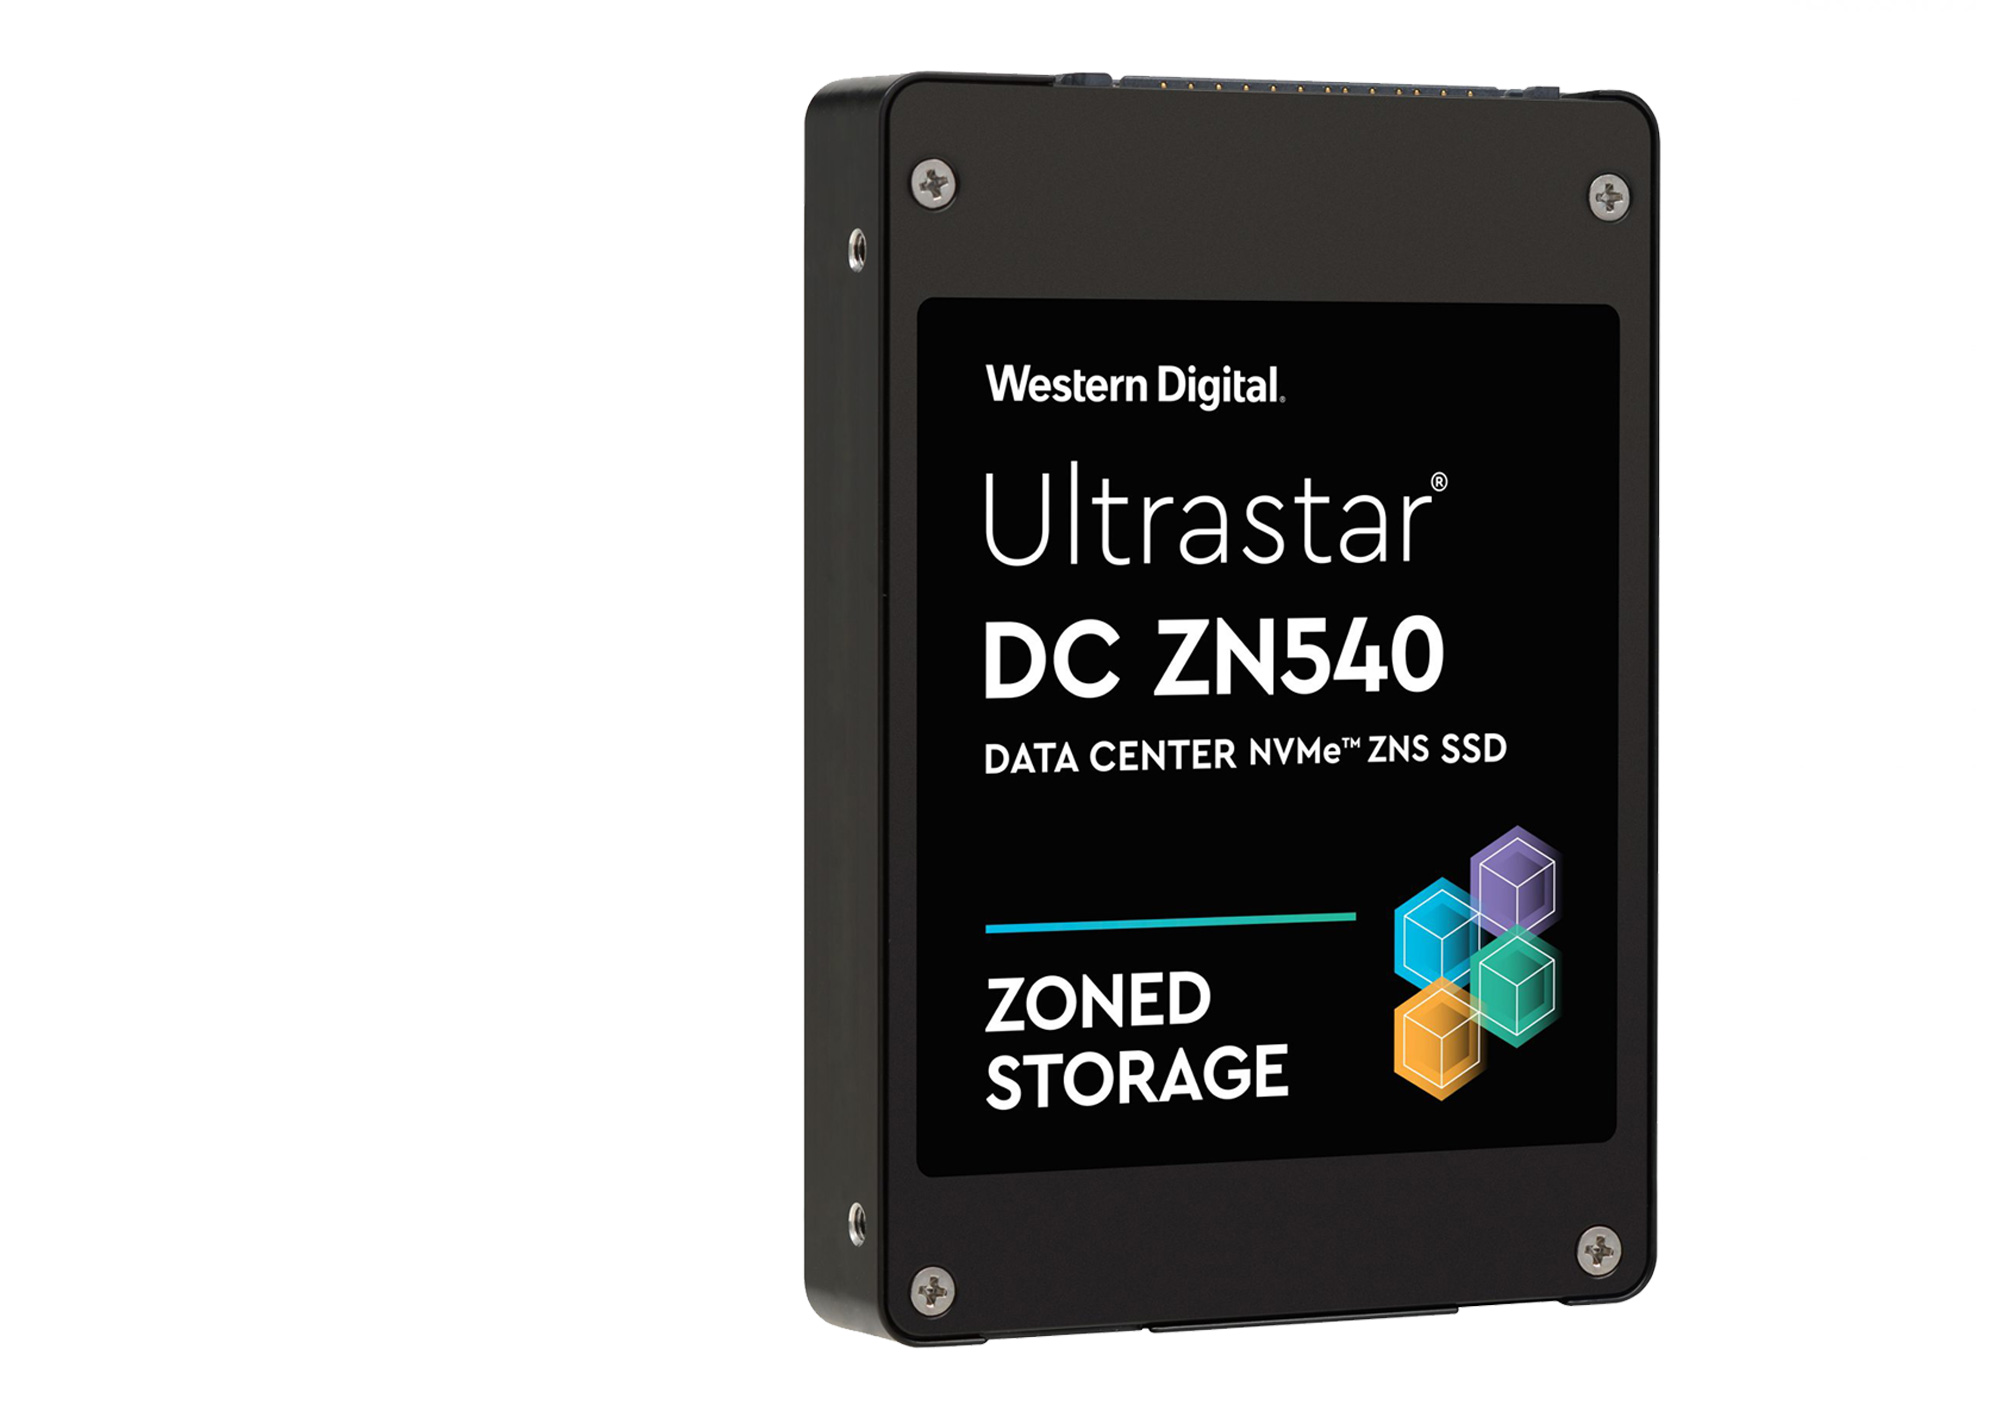 Samsung and WD collaborate on storage standardization